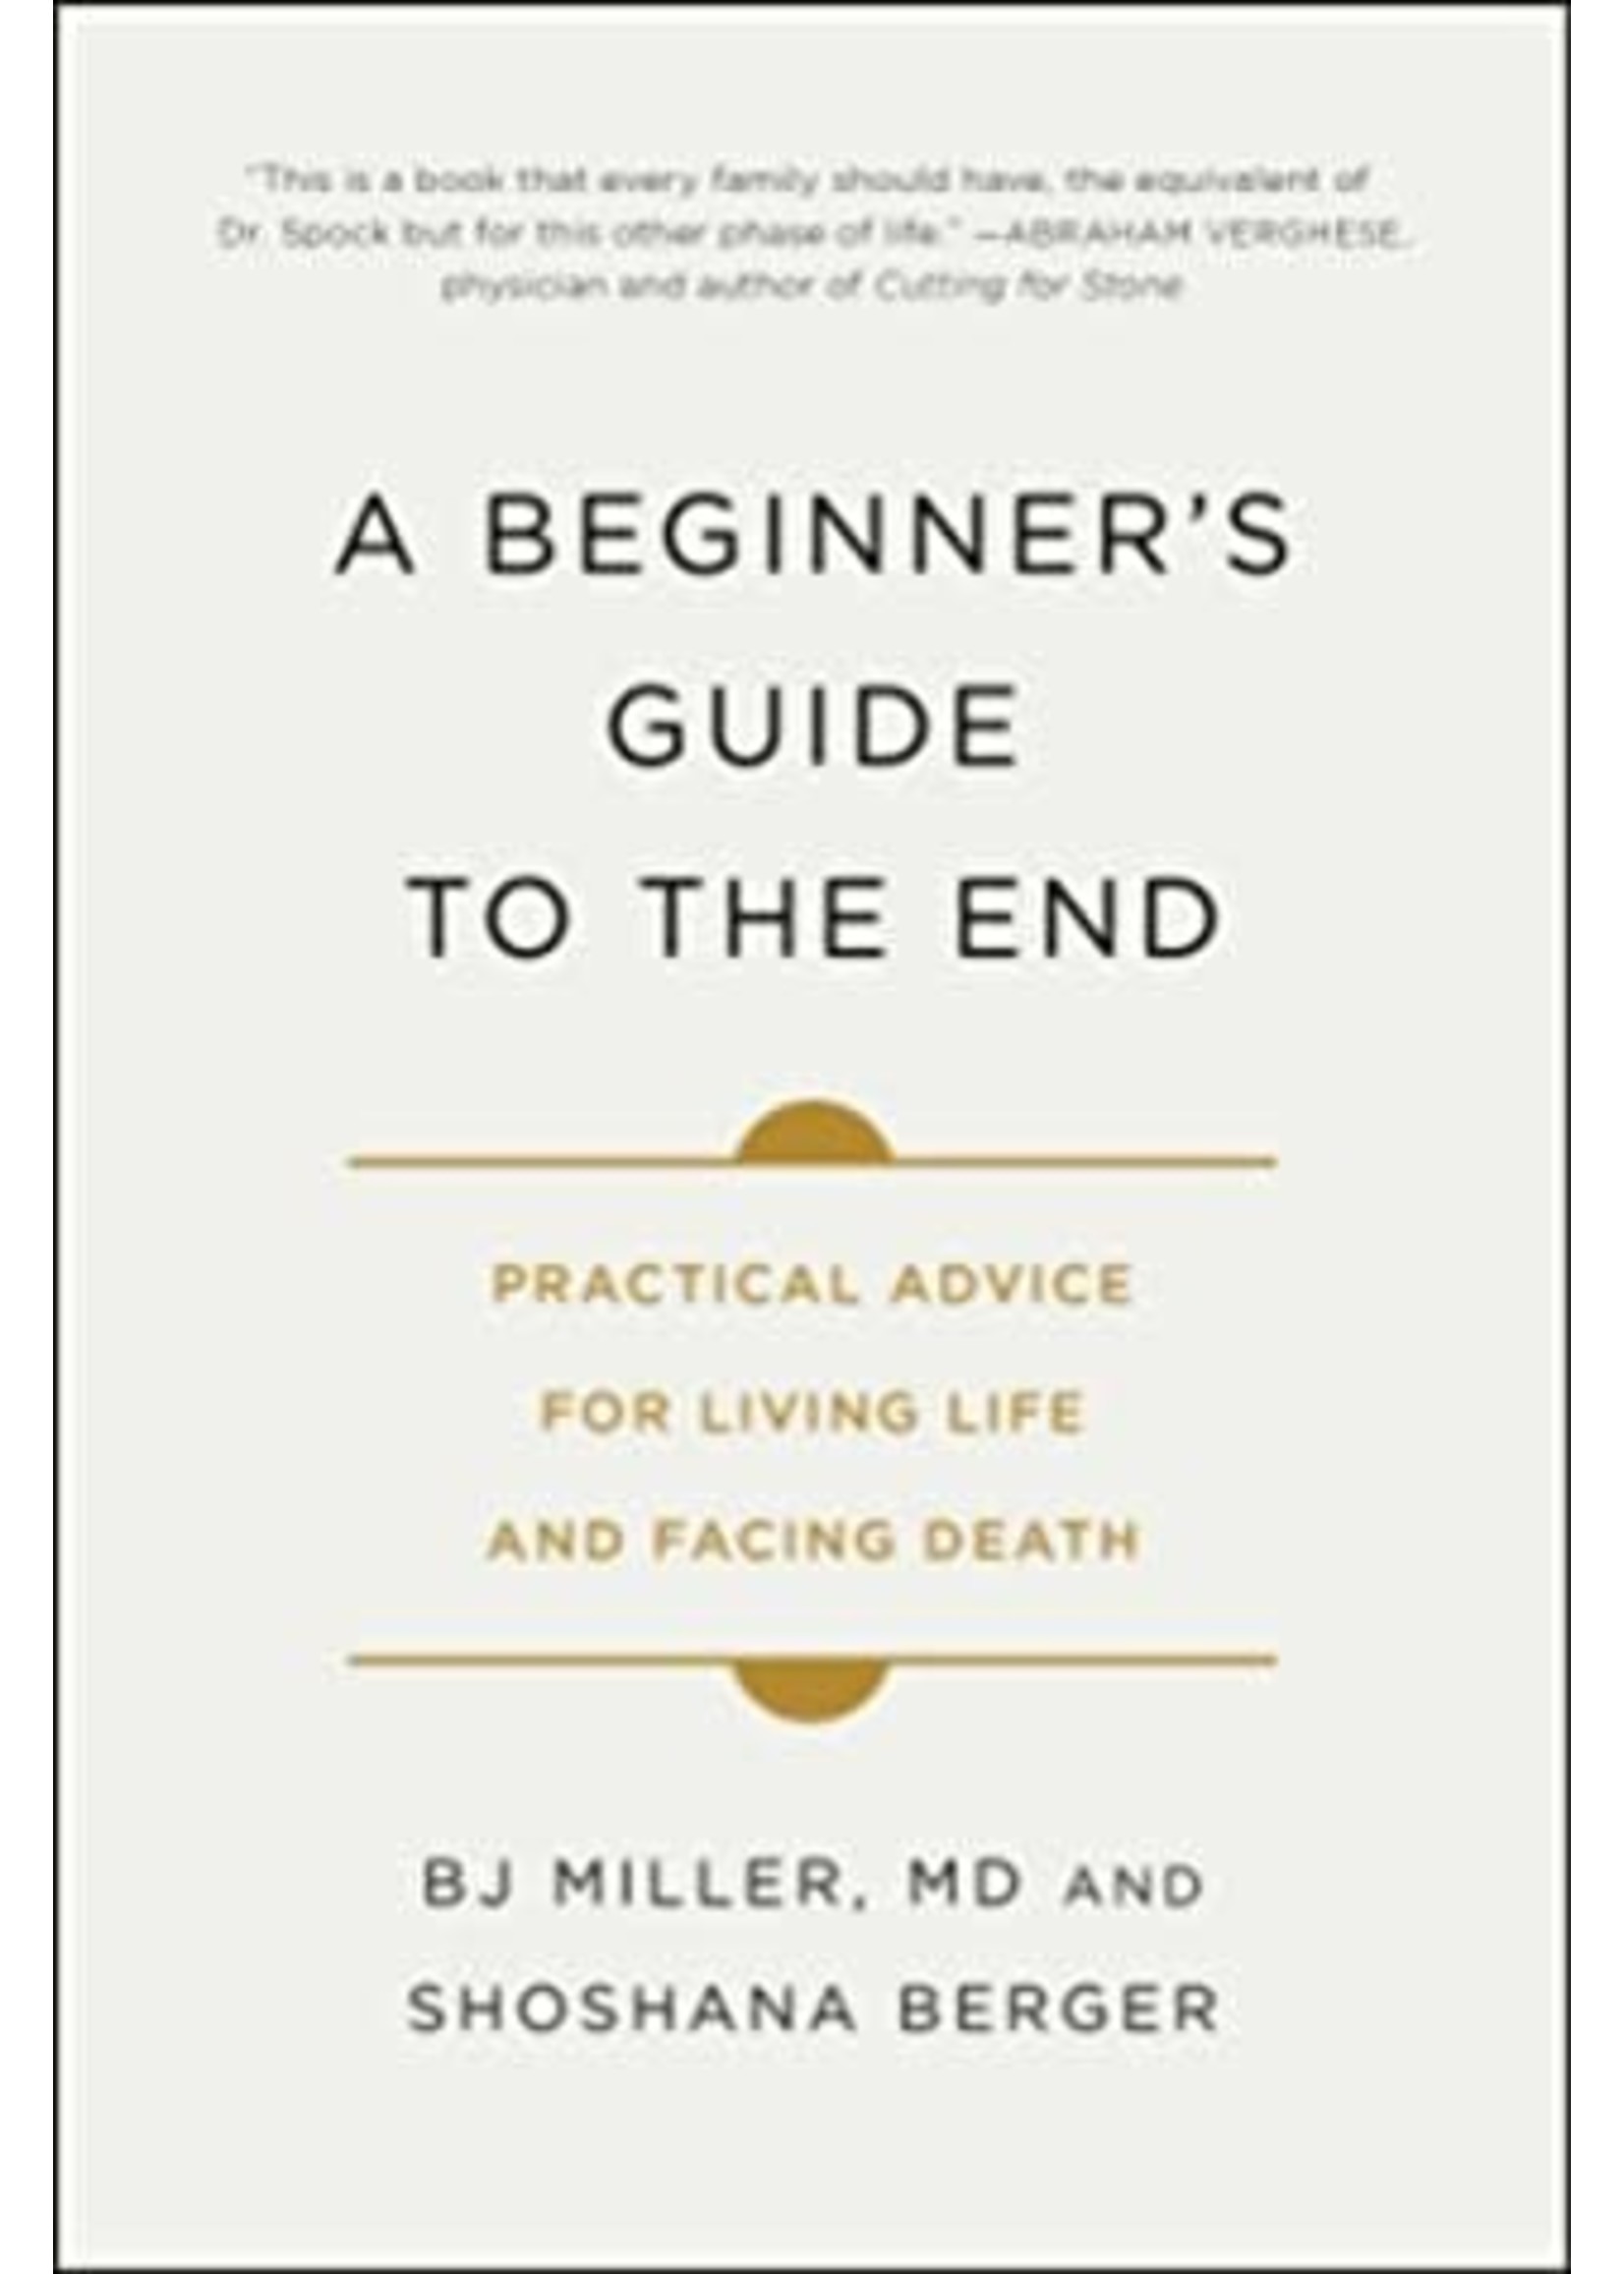 A Beginner's Guide to the End: Practical Advice for Living Life and Facing Death by B.J. Miller, Shoshana Berger